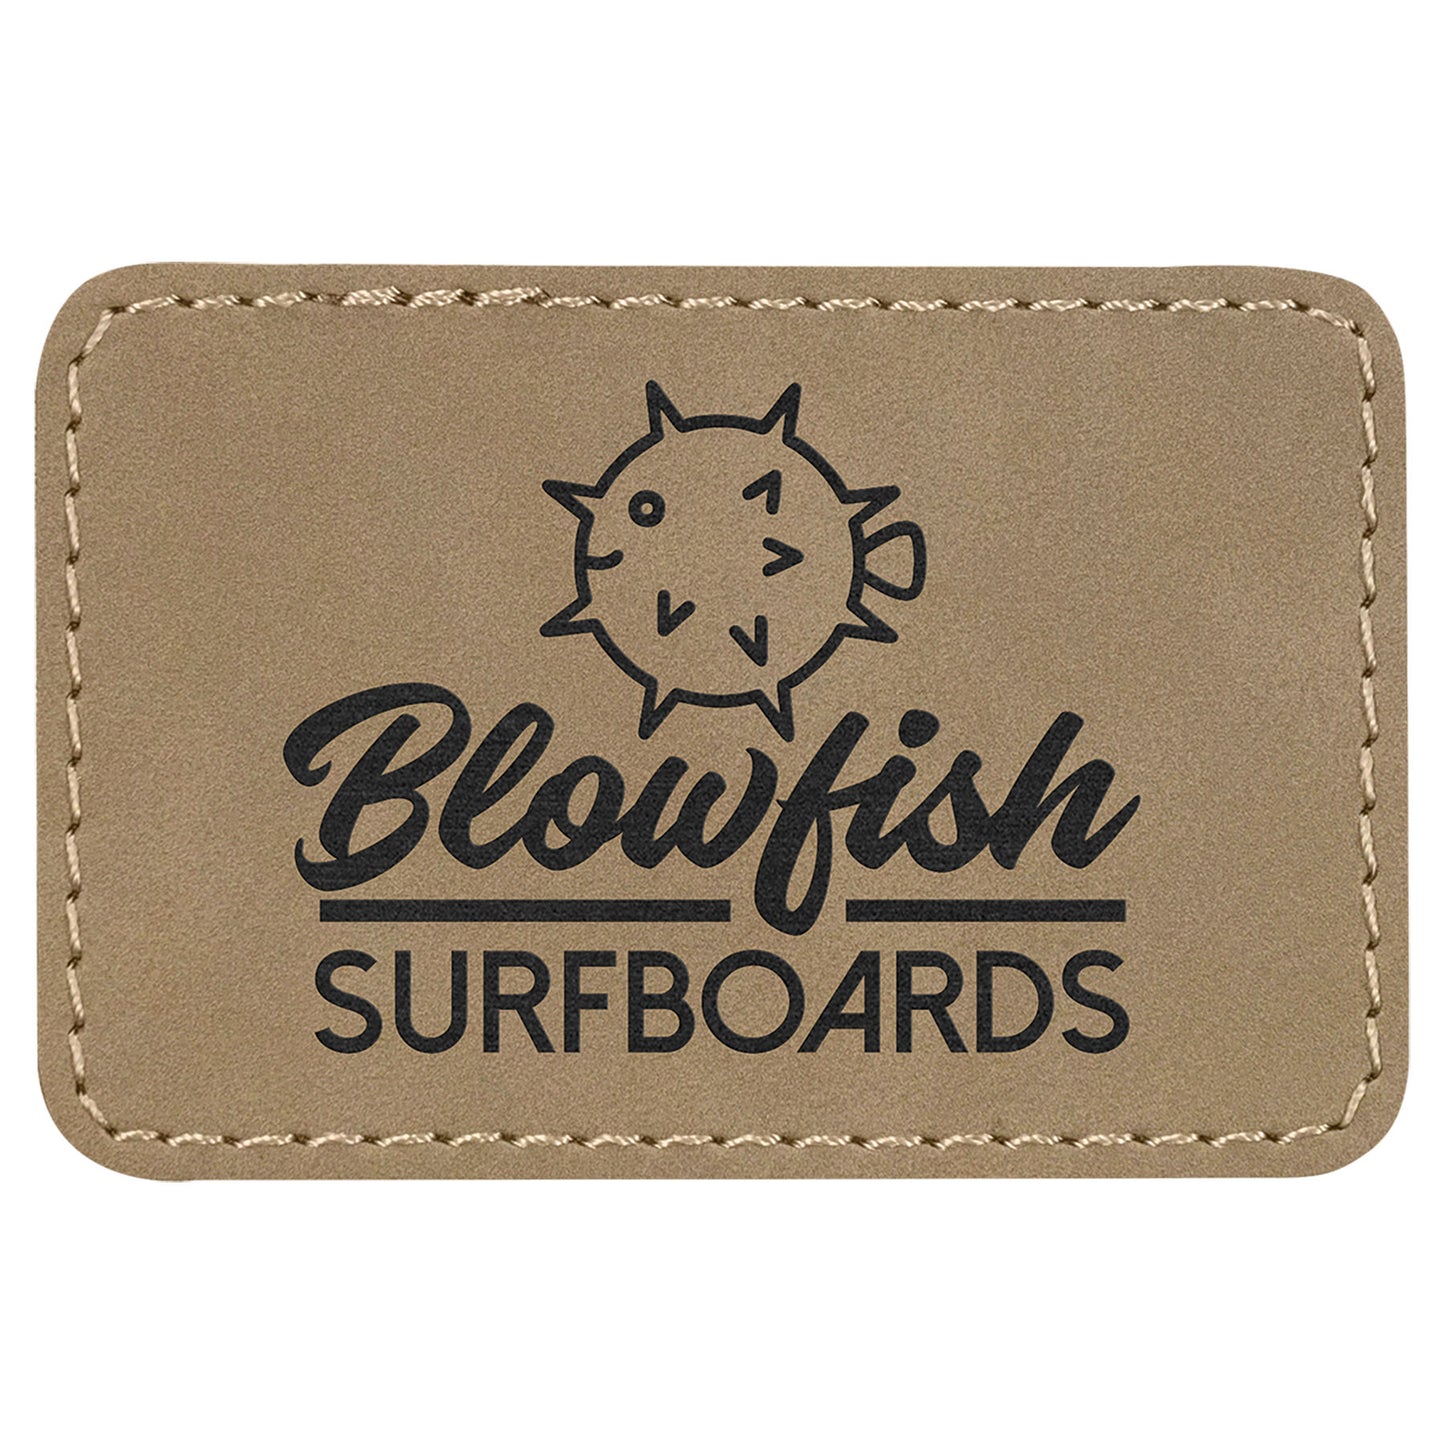 Leatherette Personalized - Rectangle Patches w/adhesive